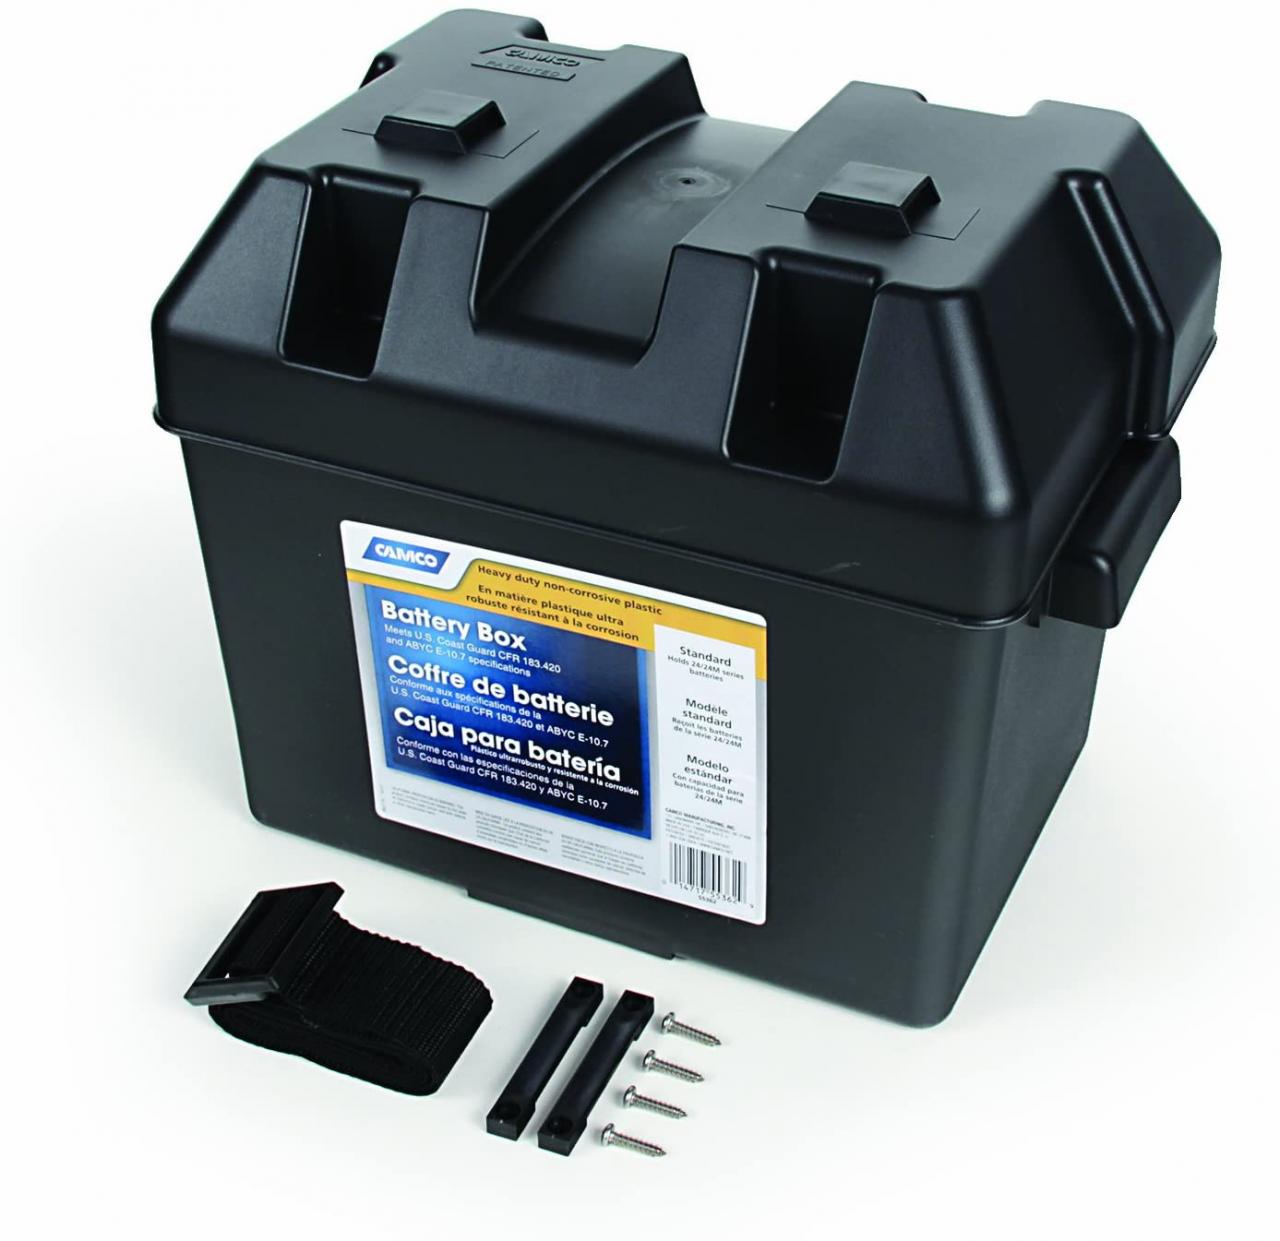 Buy Camco Heavy Duty Battery Box with Straps and Hardware - Group 24  |Safely Stores RV, Automotive, and Marine Batteries |Durable Anti-Corrosion  Material | Measures 7 ¼ x 10 ¾ x 8 - (55362) Online in Indonesia. B00EOX2OKS